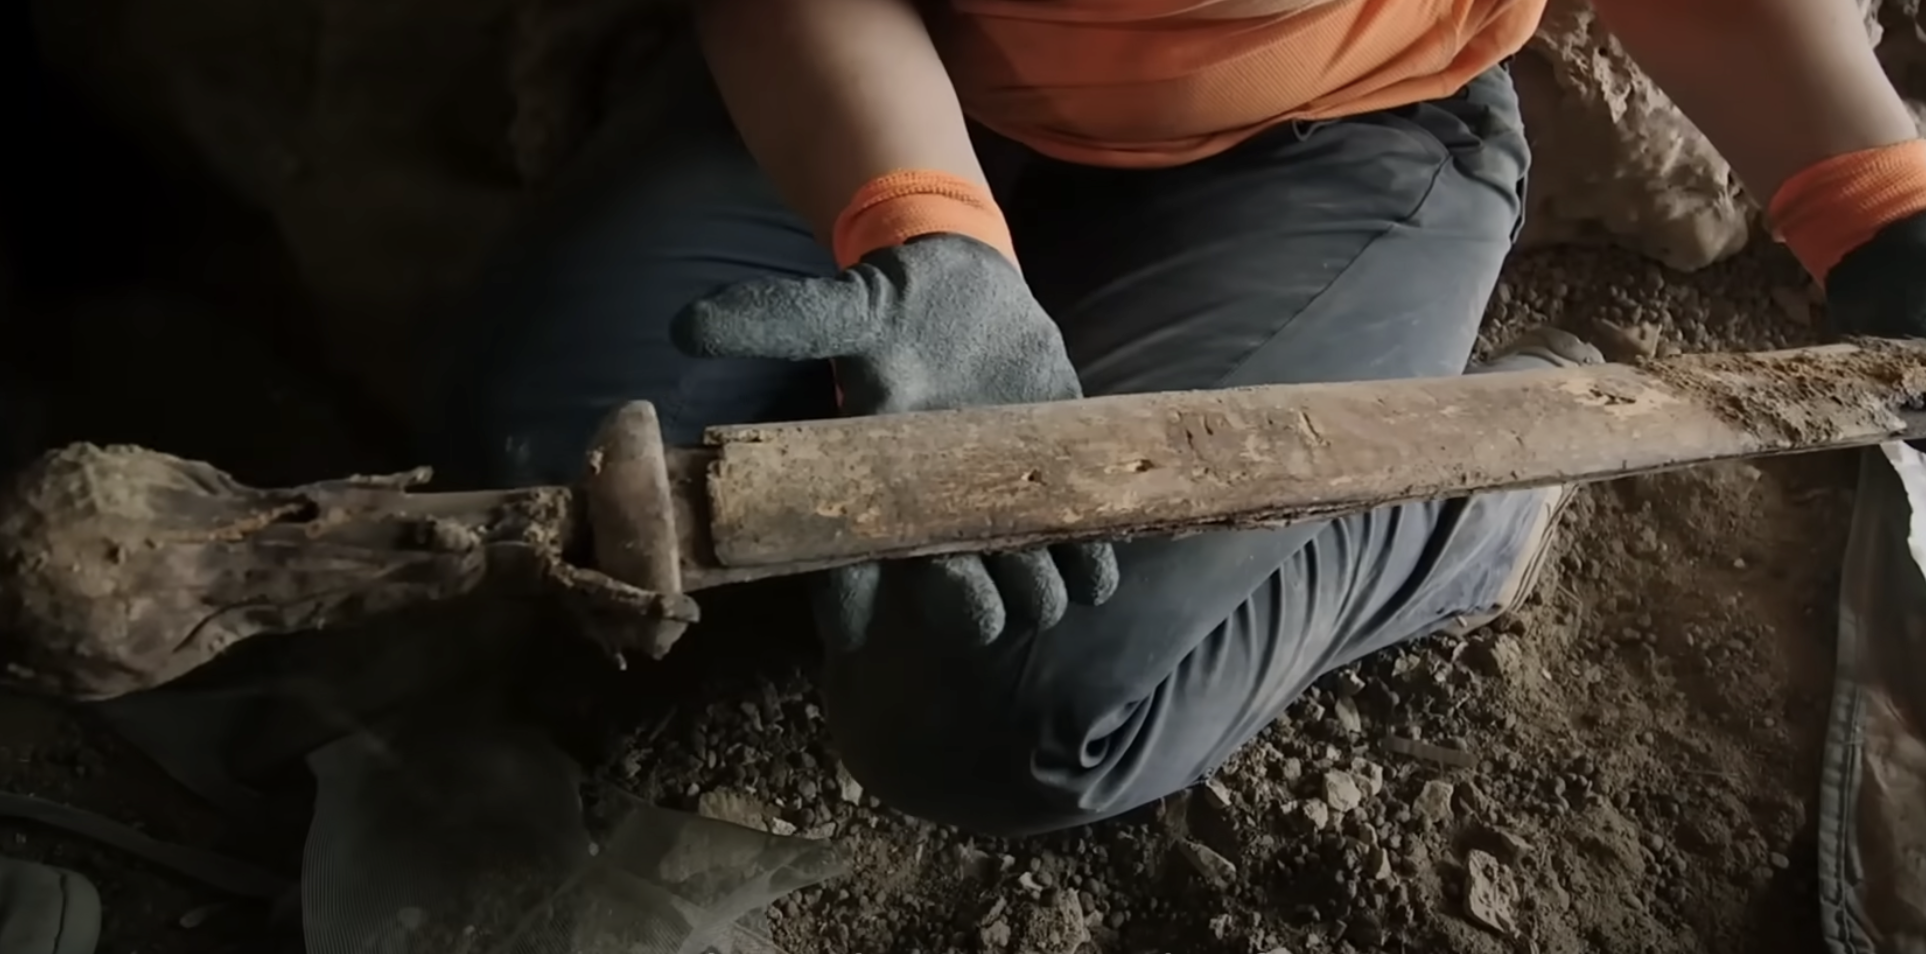 Pristine Roman Battle Swords Emerge from Israeli Desert Cave after 1,900 Years. Youtube.